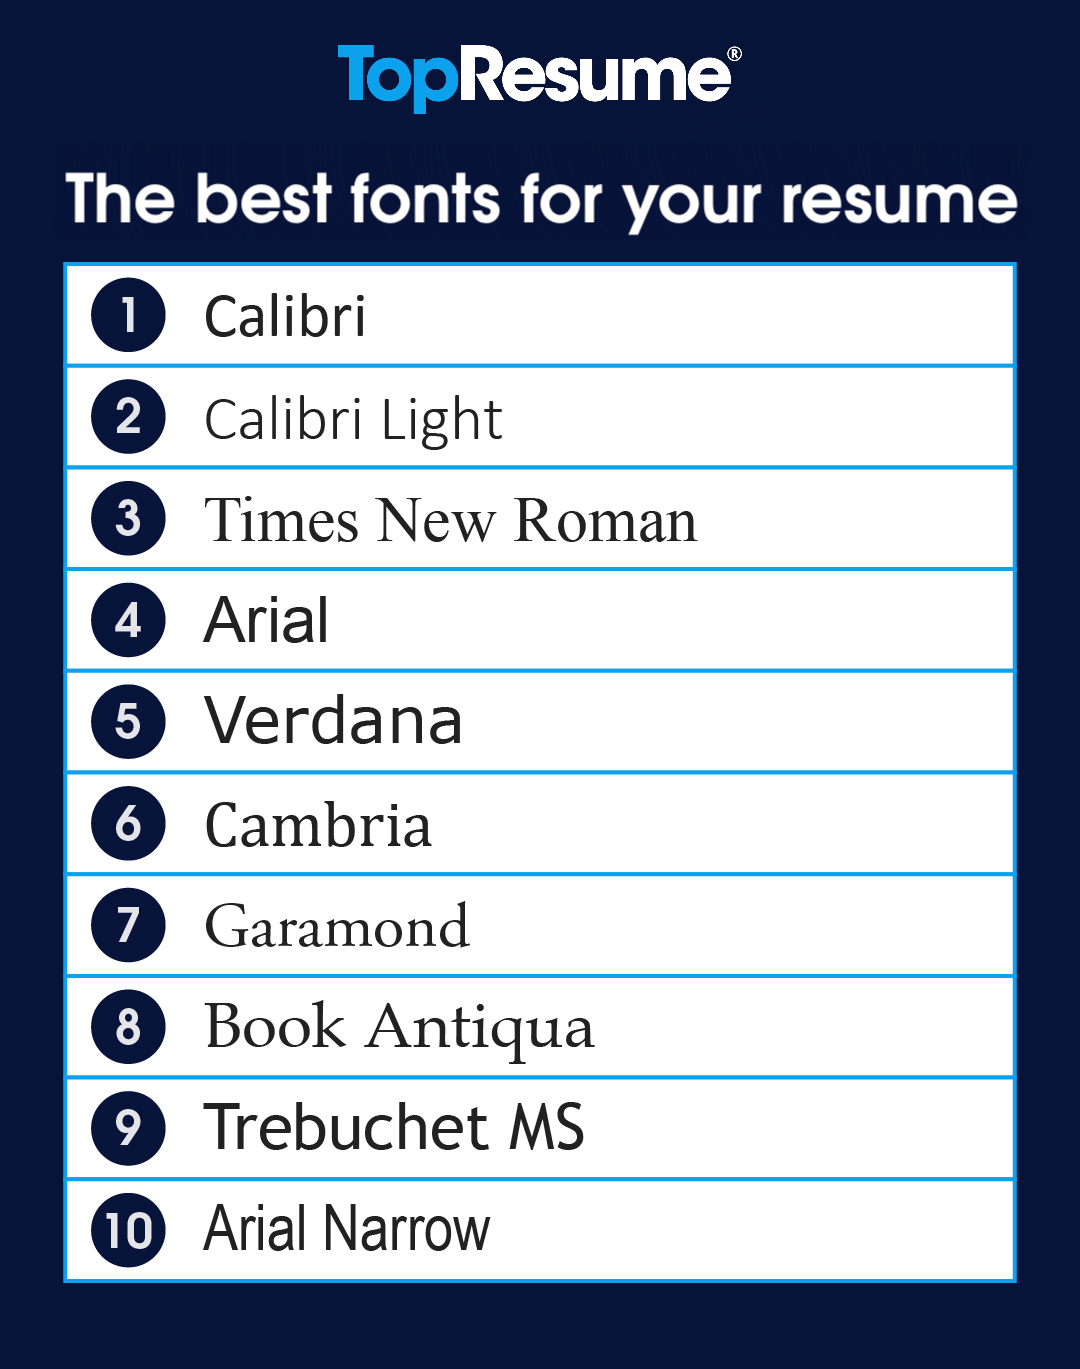 What Are the Best Fonts for a Resume?